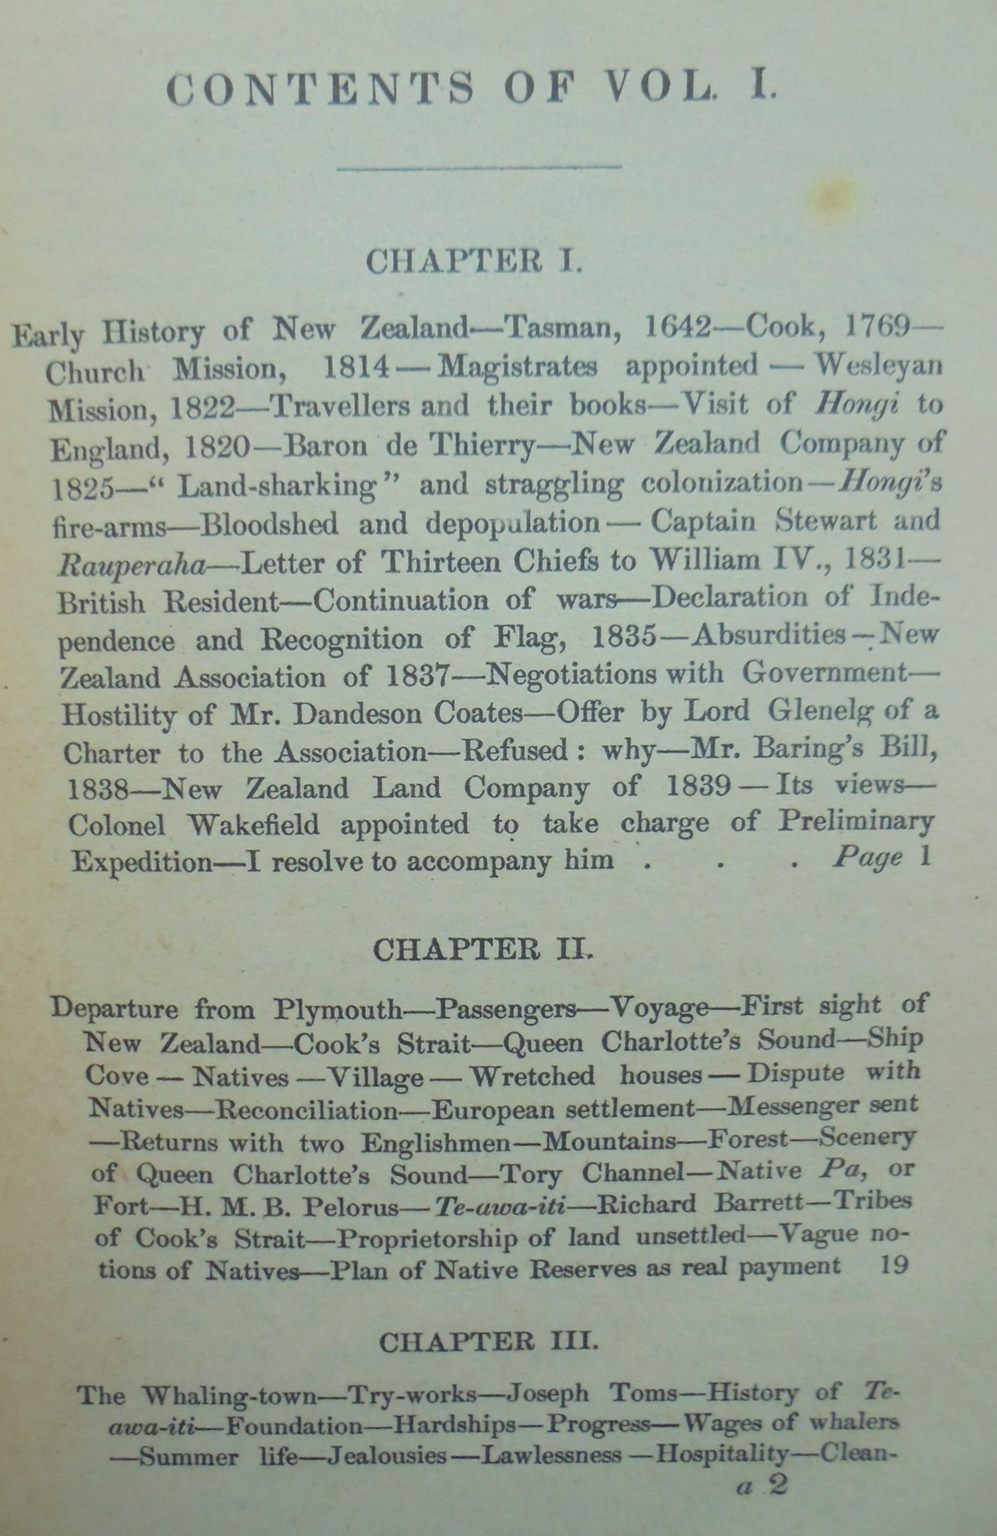 Adventure in New Zealand. from 1839 to 1844. Vol. 1 and 2 by E.J. Wakefield.